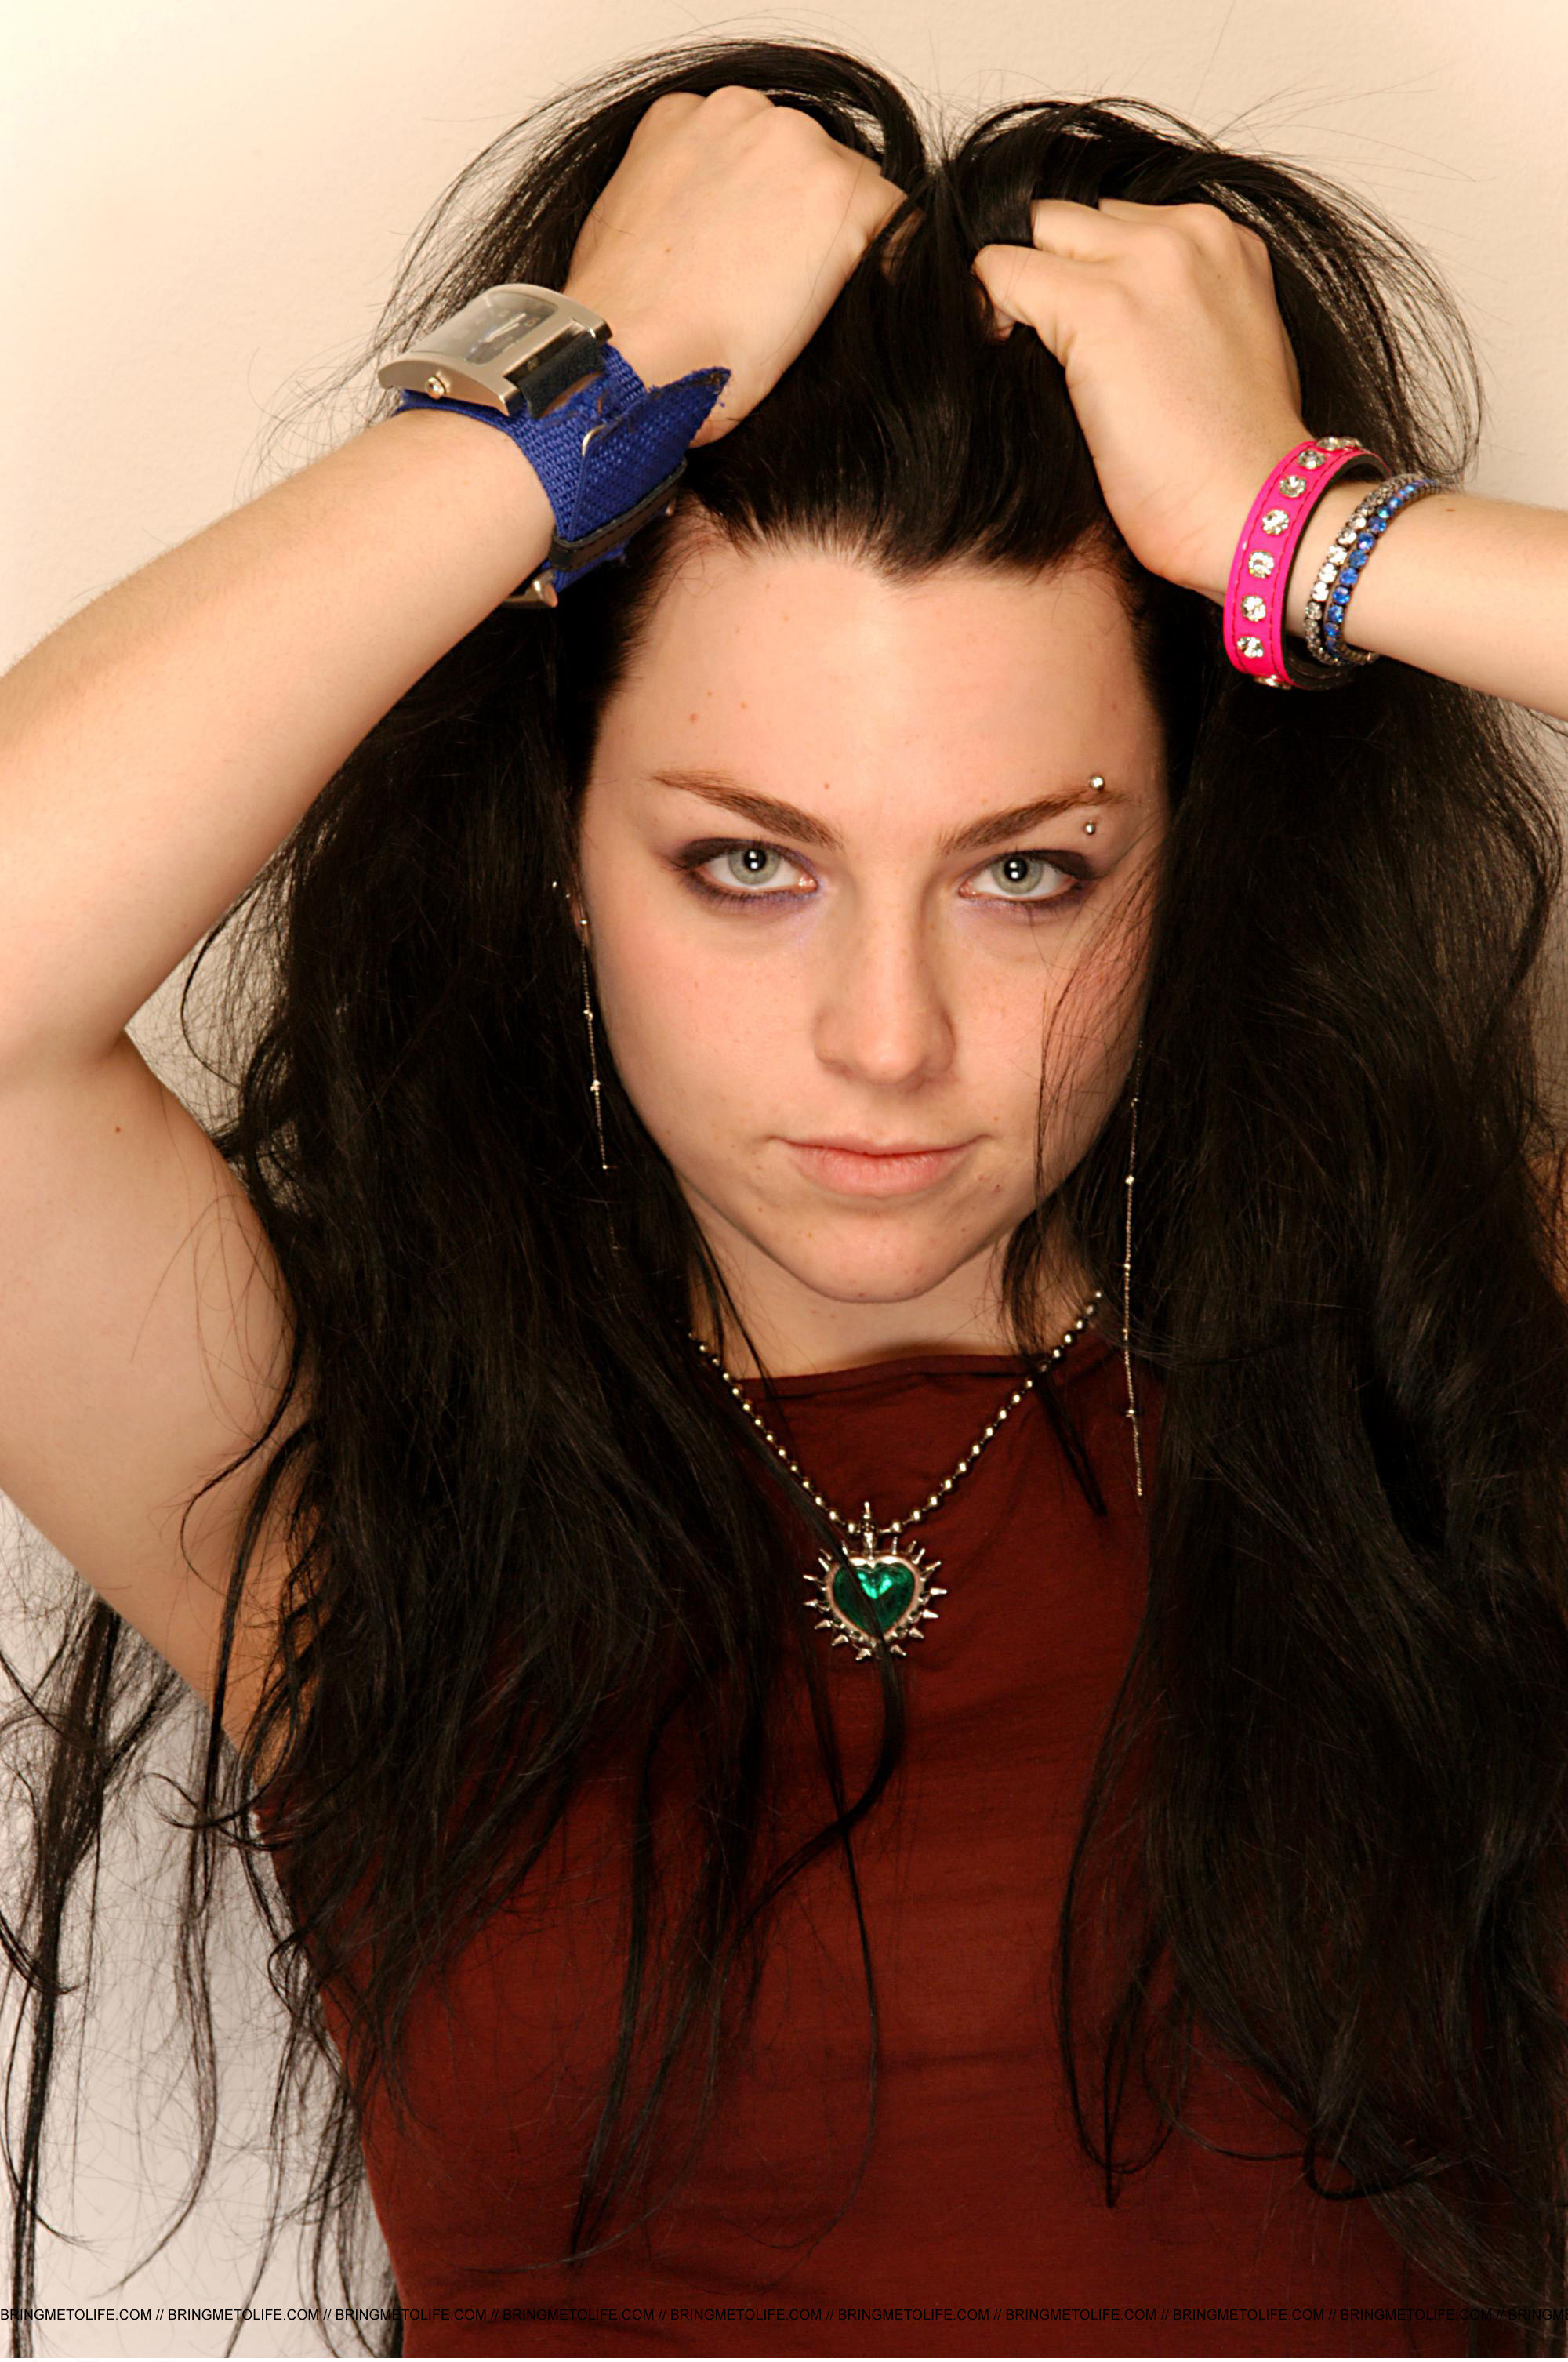 HD Wallpaper and background photos of amy lee for fans of Amy Lee images